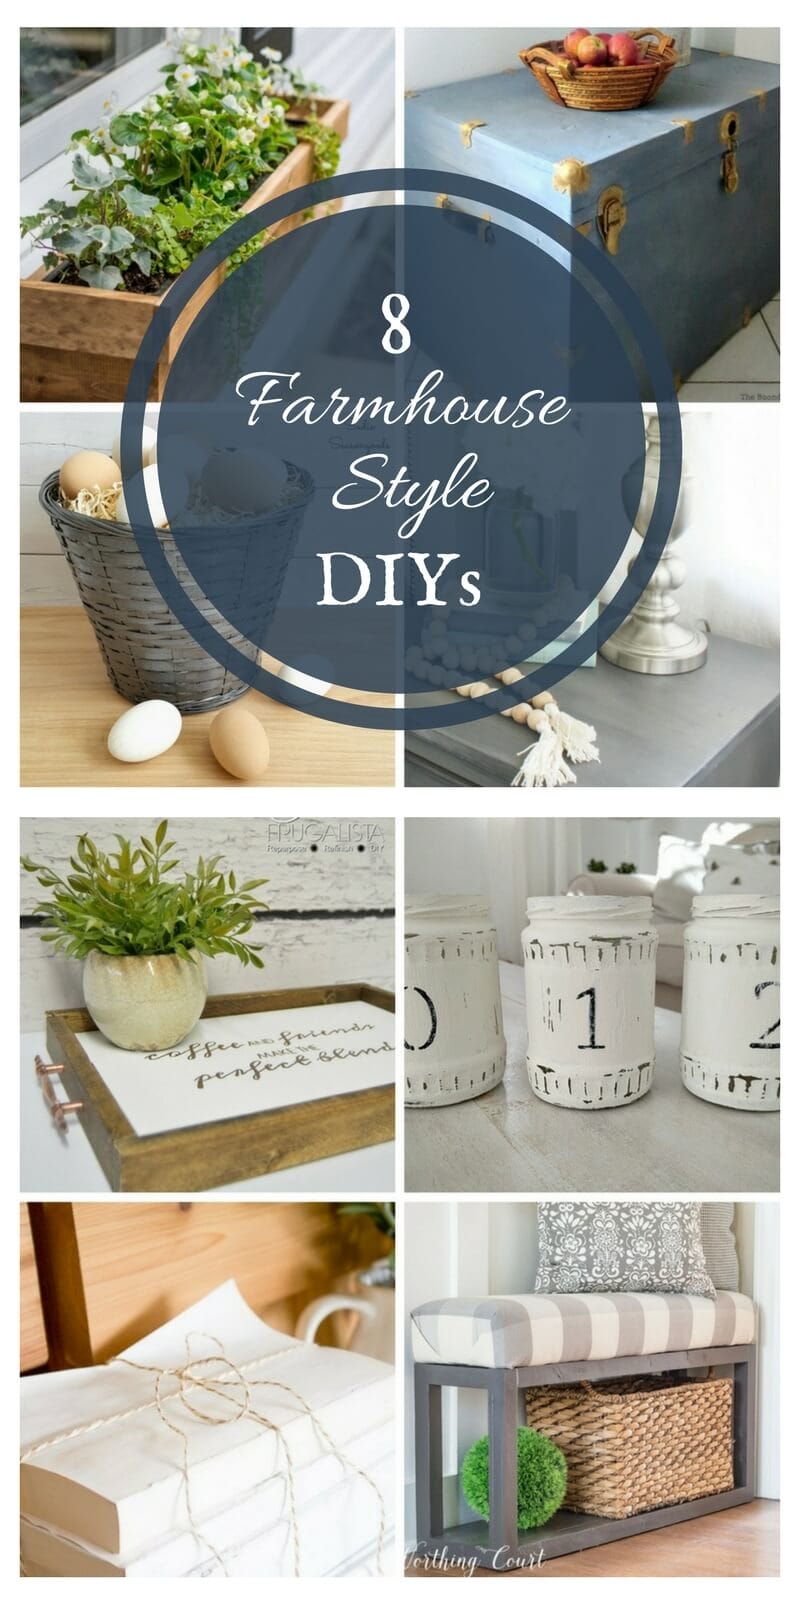 8 Farmhouse Style DIY Projects | Merry Monday Link Party